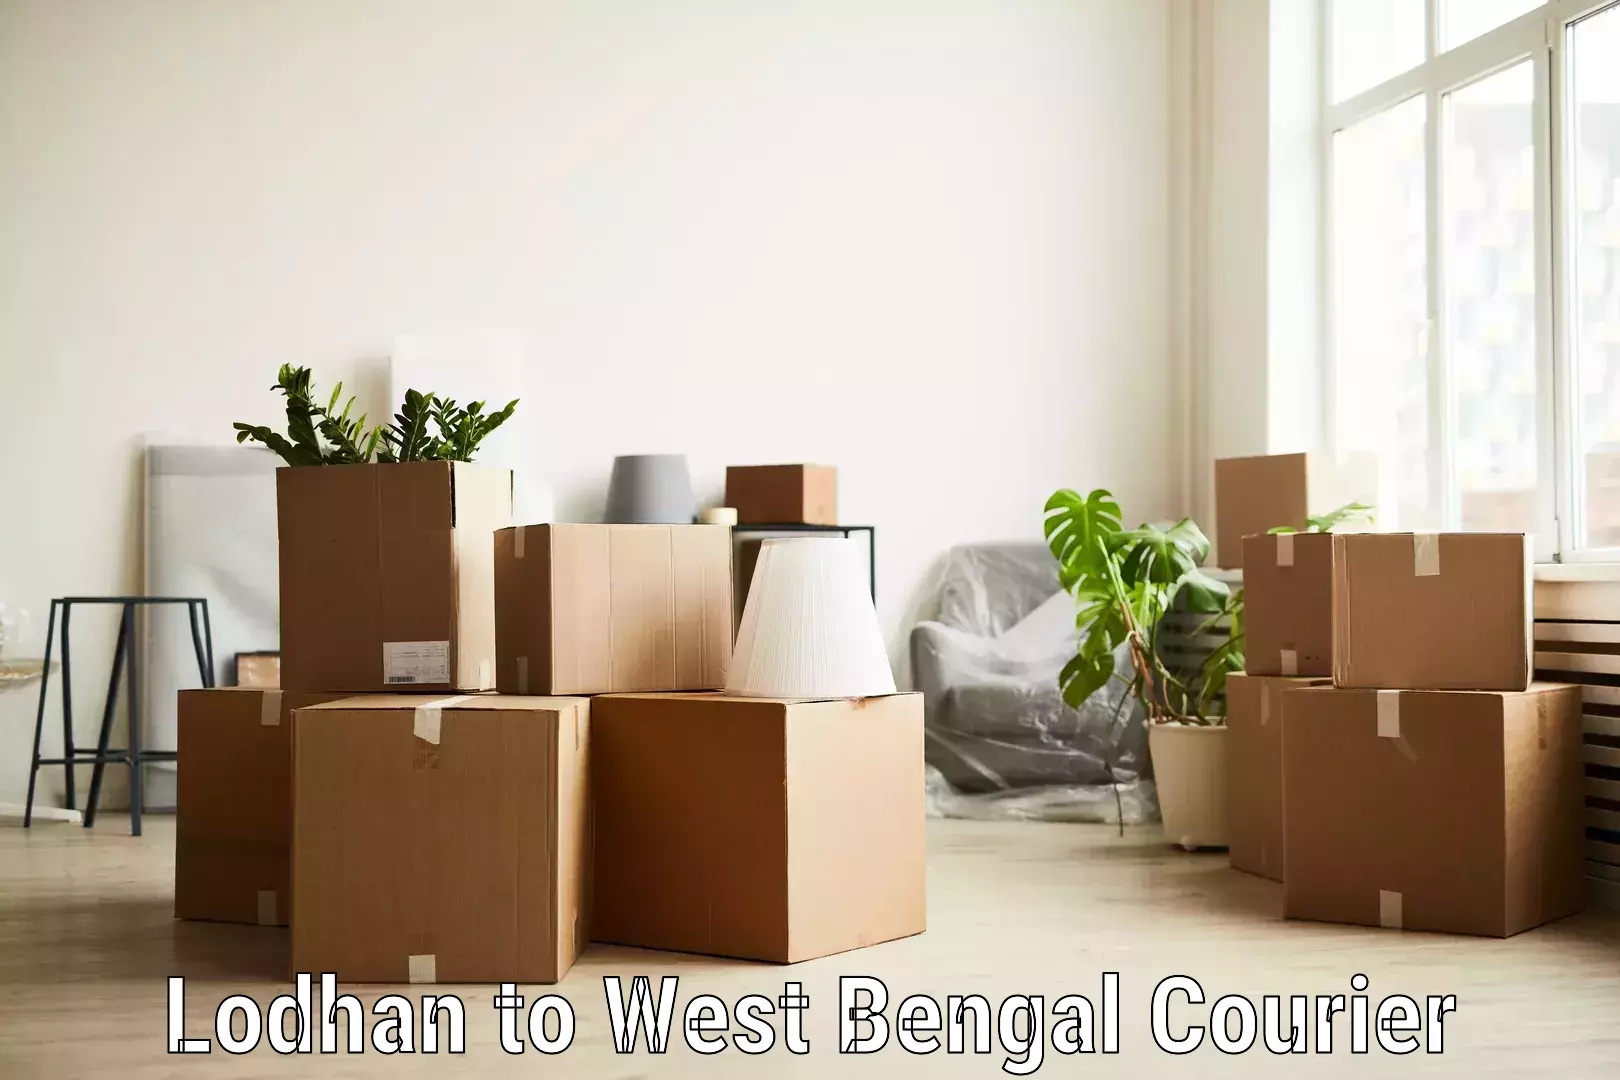 Parcel service for businesses Lodhan to Para Purulia